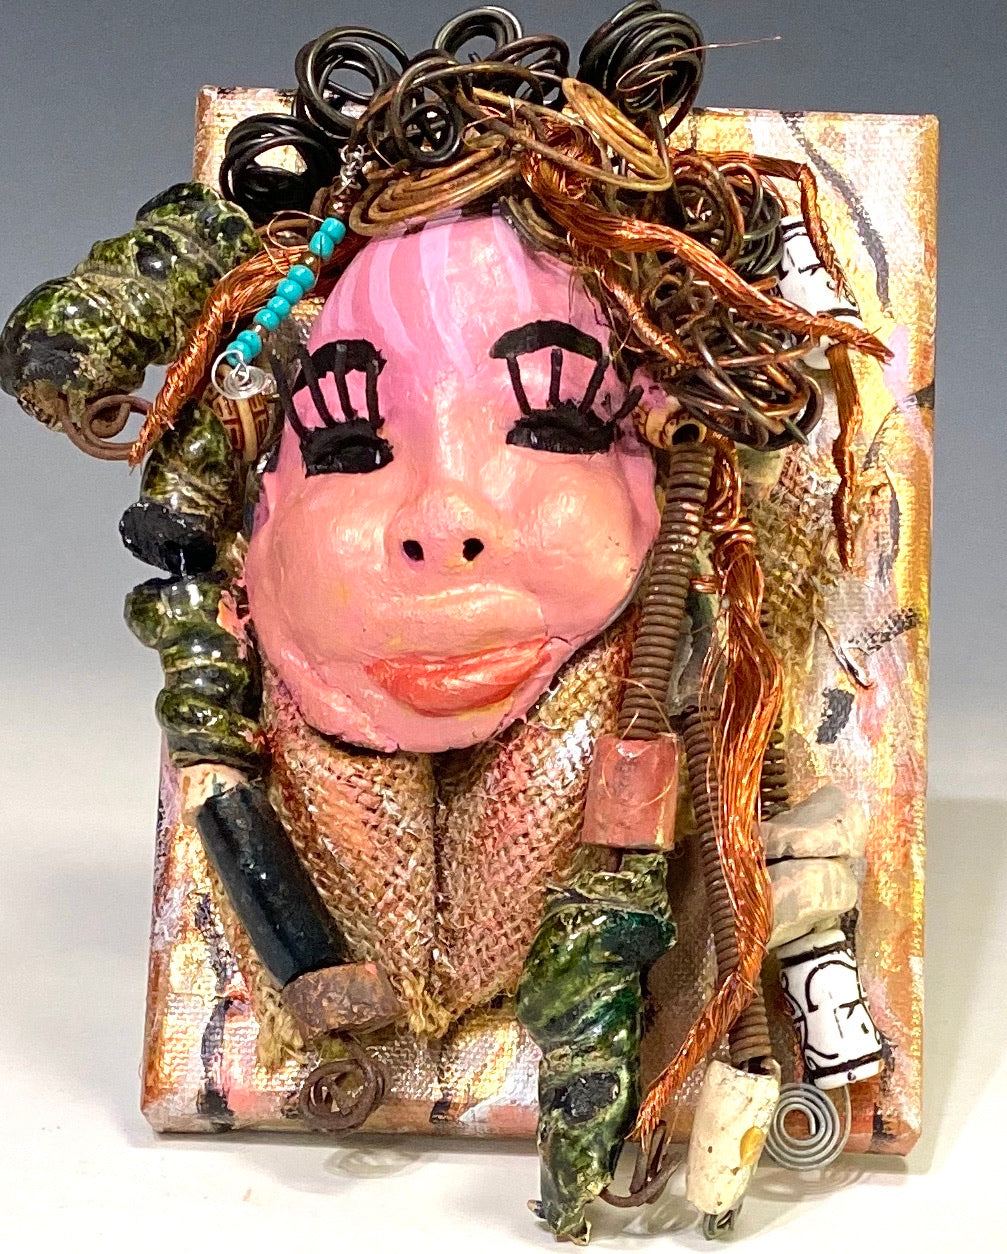 Peggy has a pink and white complexion with ruby red lips! She is mounted on a  5” x 7” and weighs 1.2 lbs. Peggy  has an awesome blue tribal beaded hair dress. She has over 30 feet of coiled 16 gauge wire and copper strands of hair.